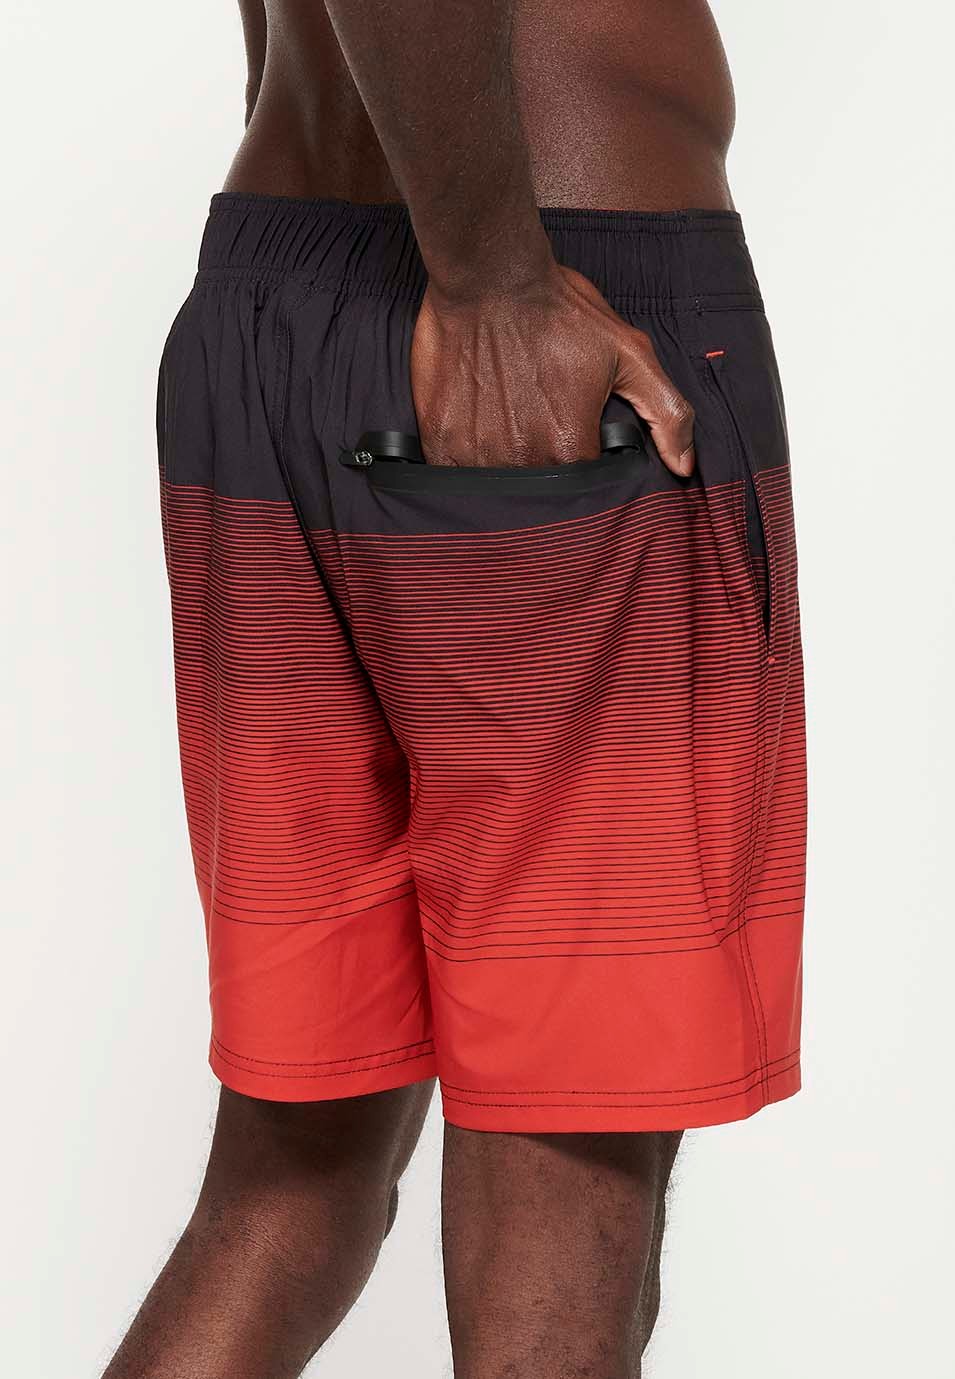 Printed swim shorts with adjustable waist, red gradient color for men